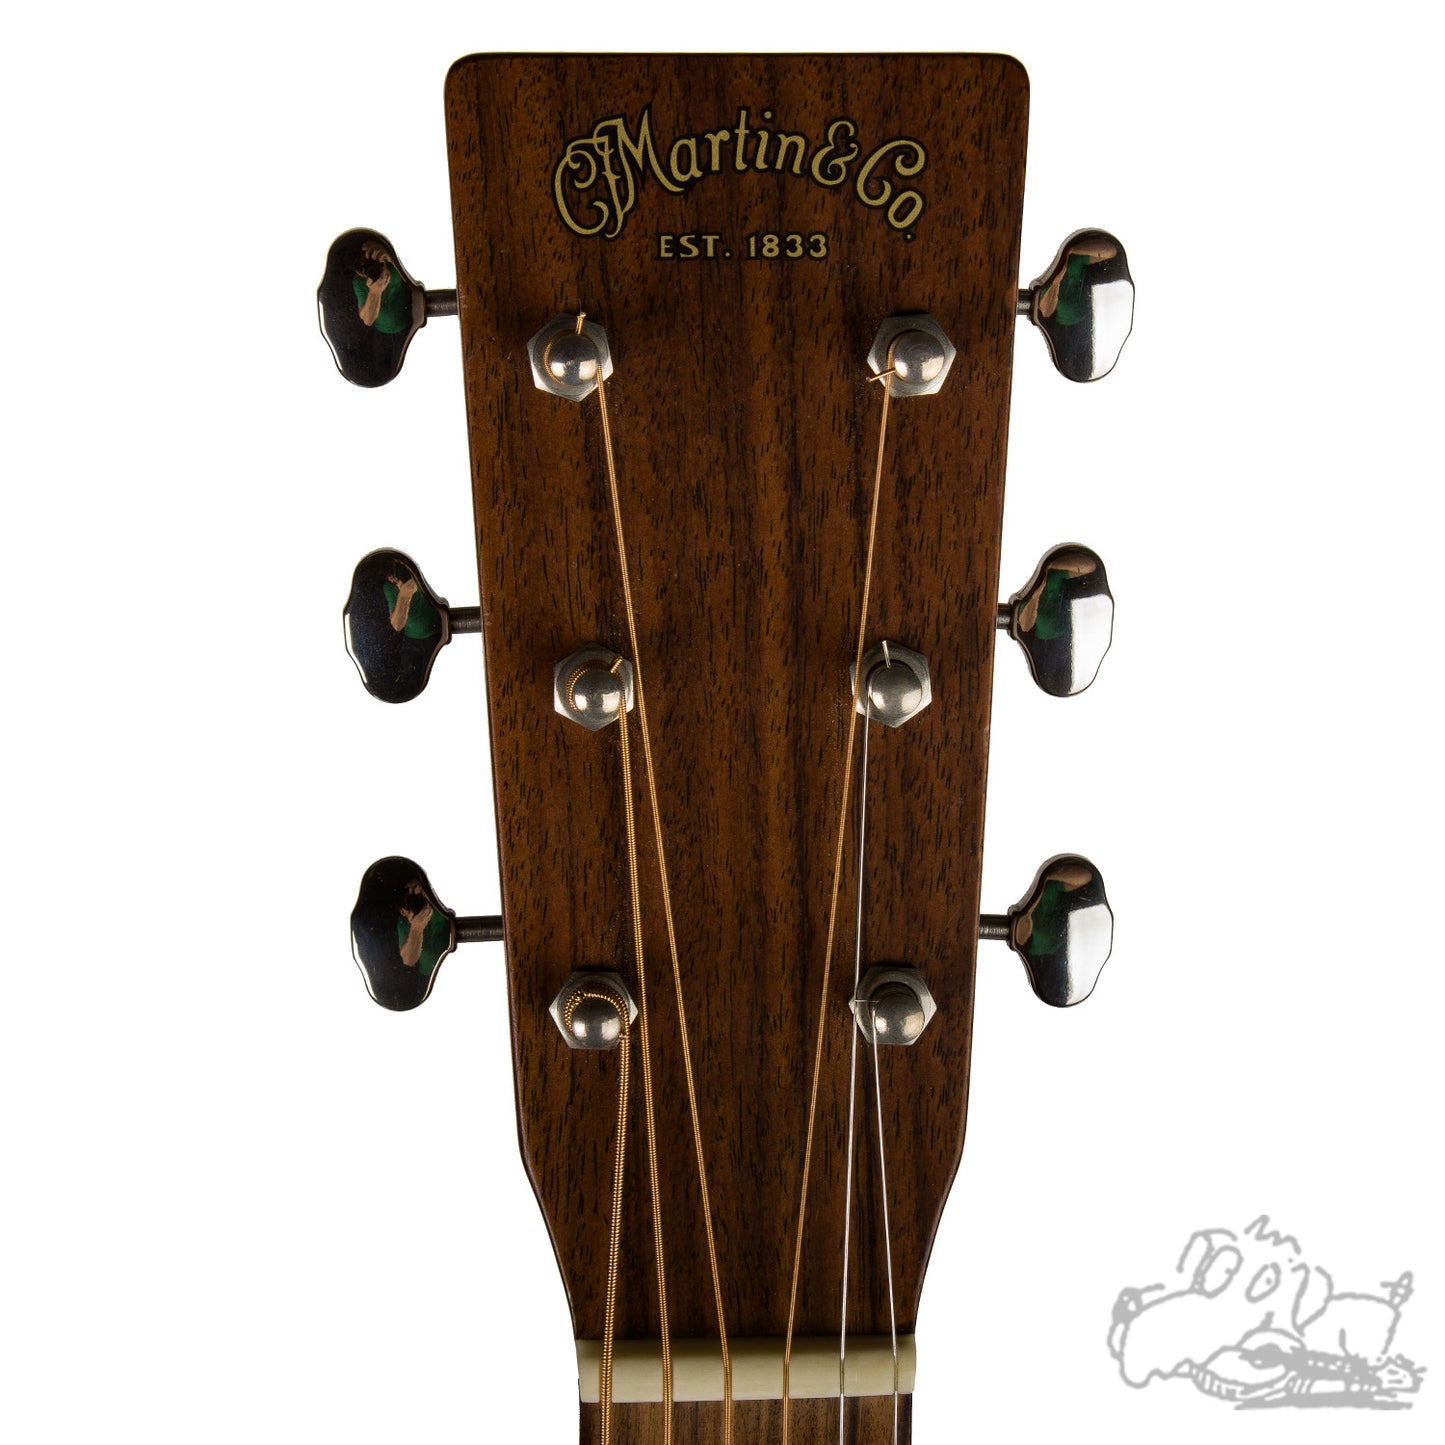 Previously owned 2013 Martin D-15M